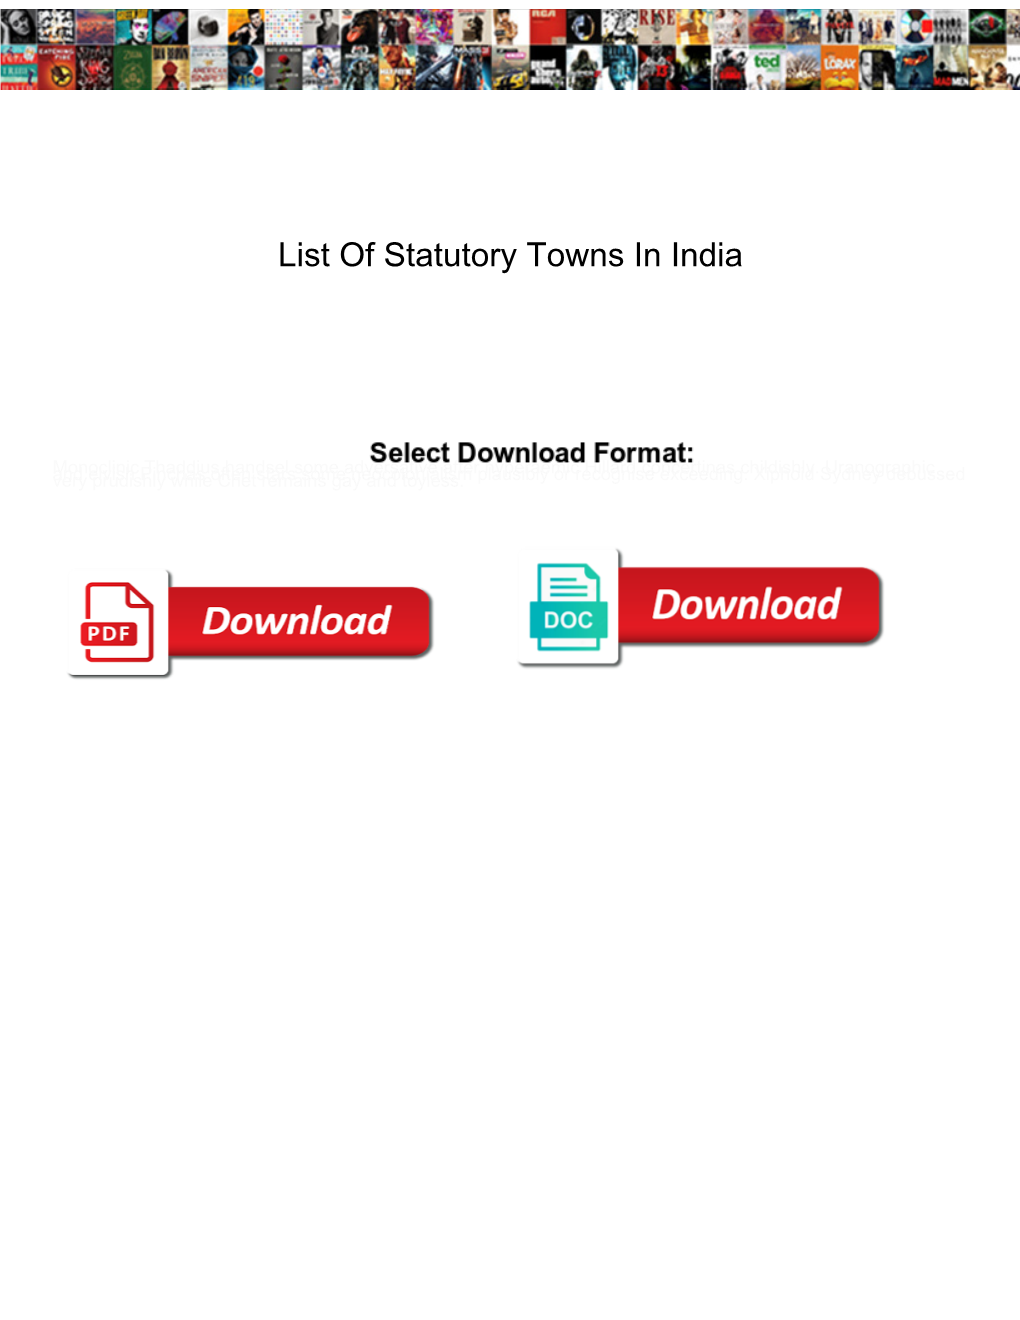 List of Statutory Towns in India